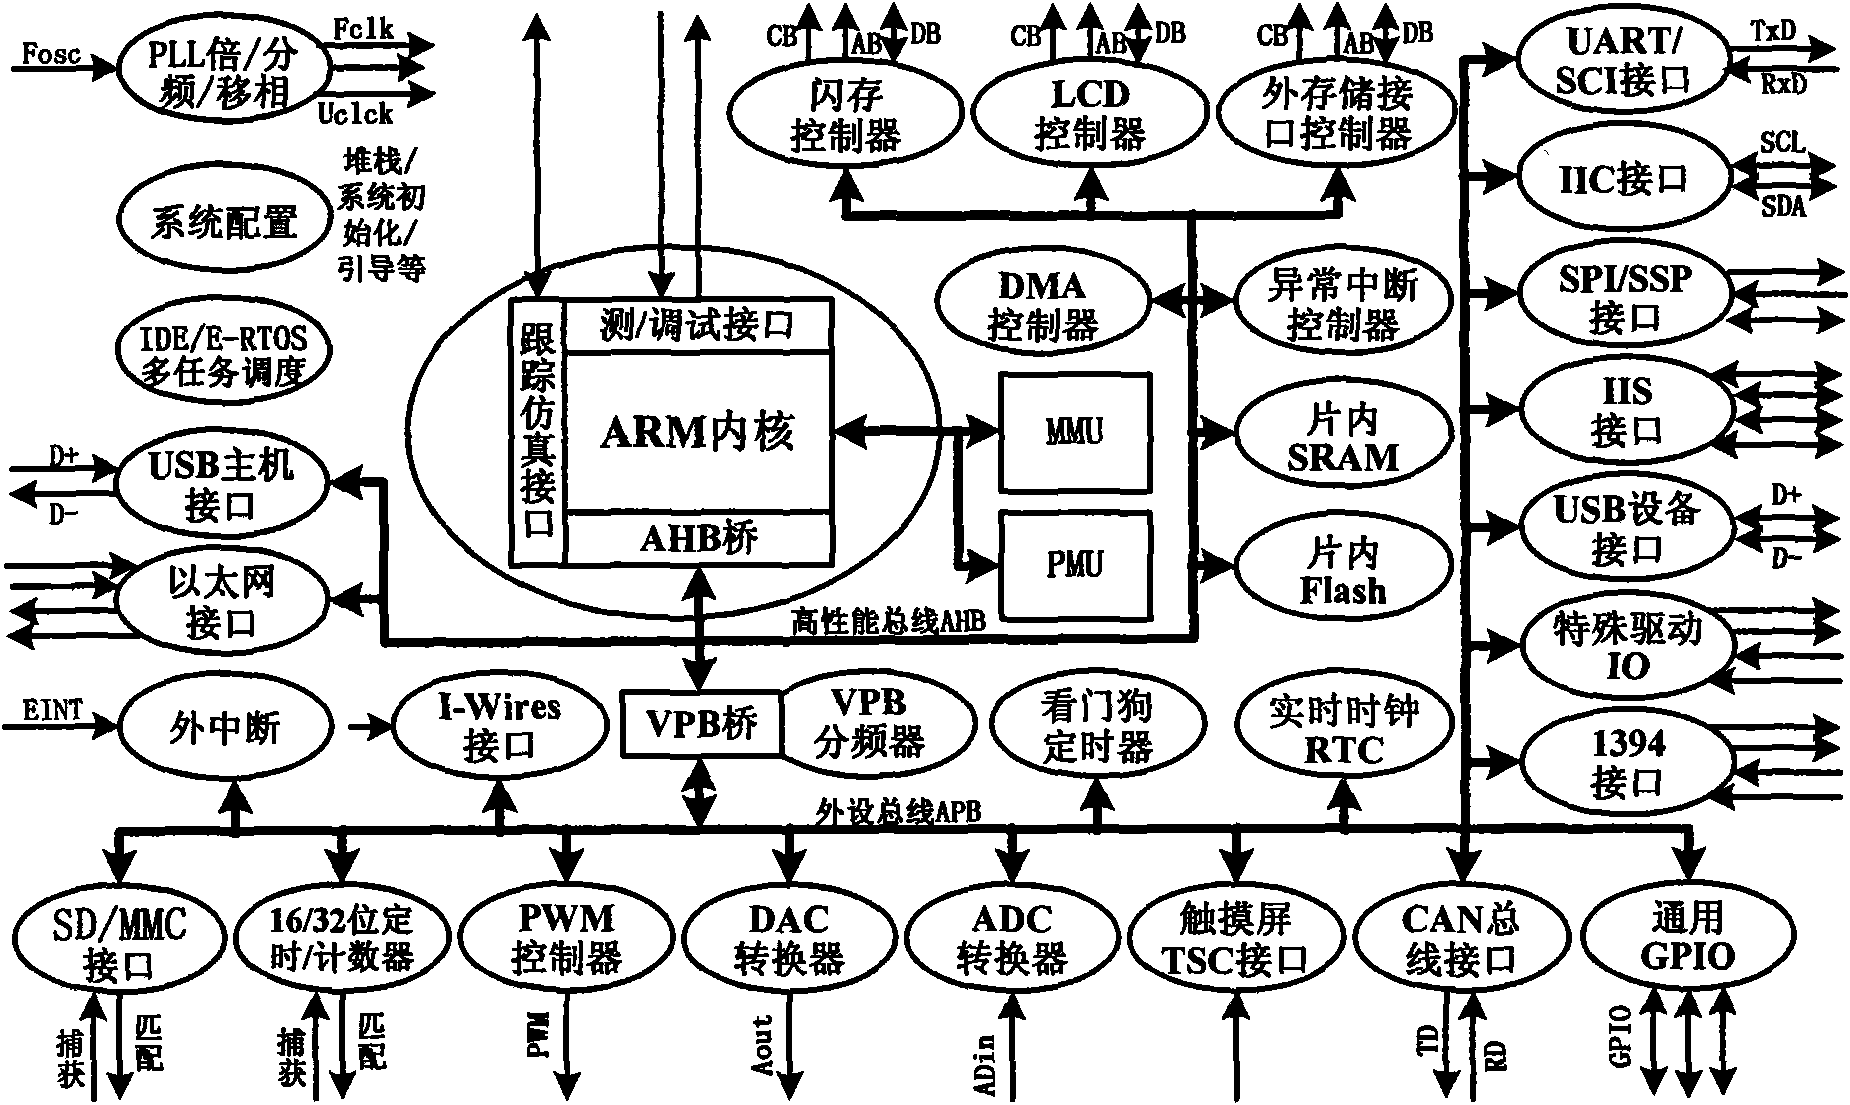 Software system configuring tool of ARM series microprocessor